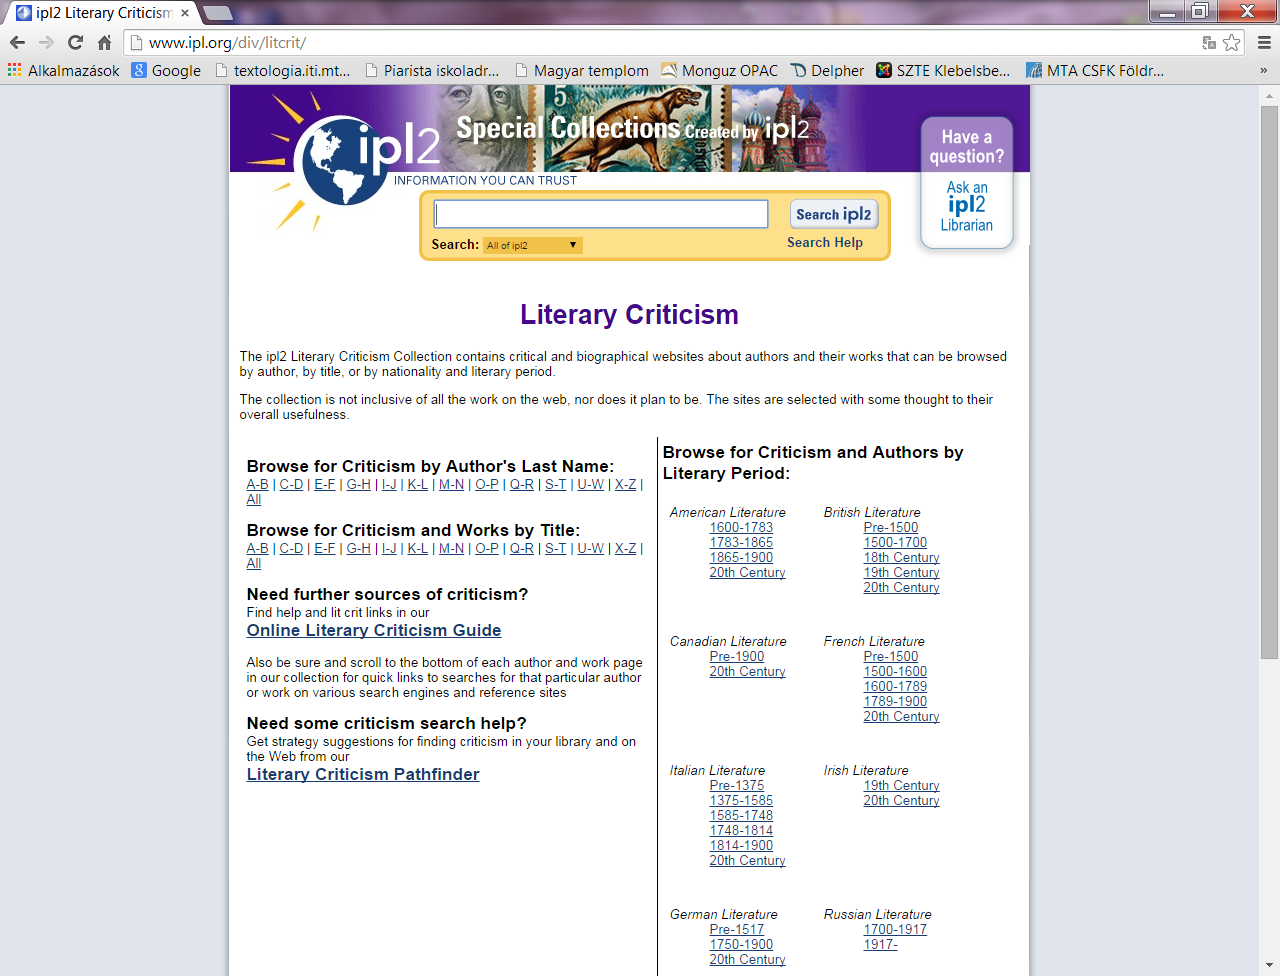 The Internet Public Library : Literary Criticism